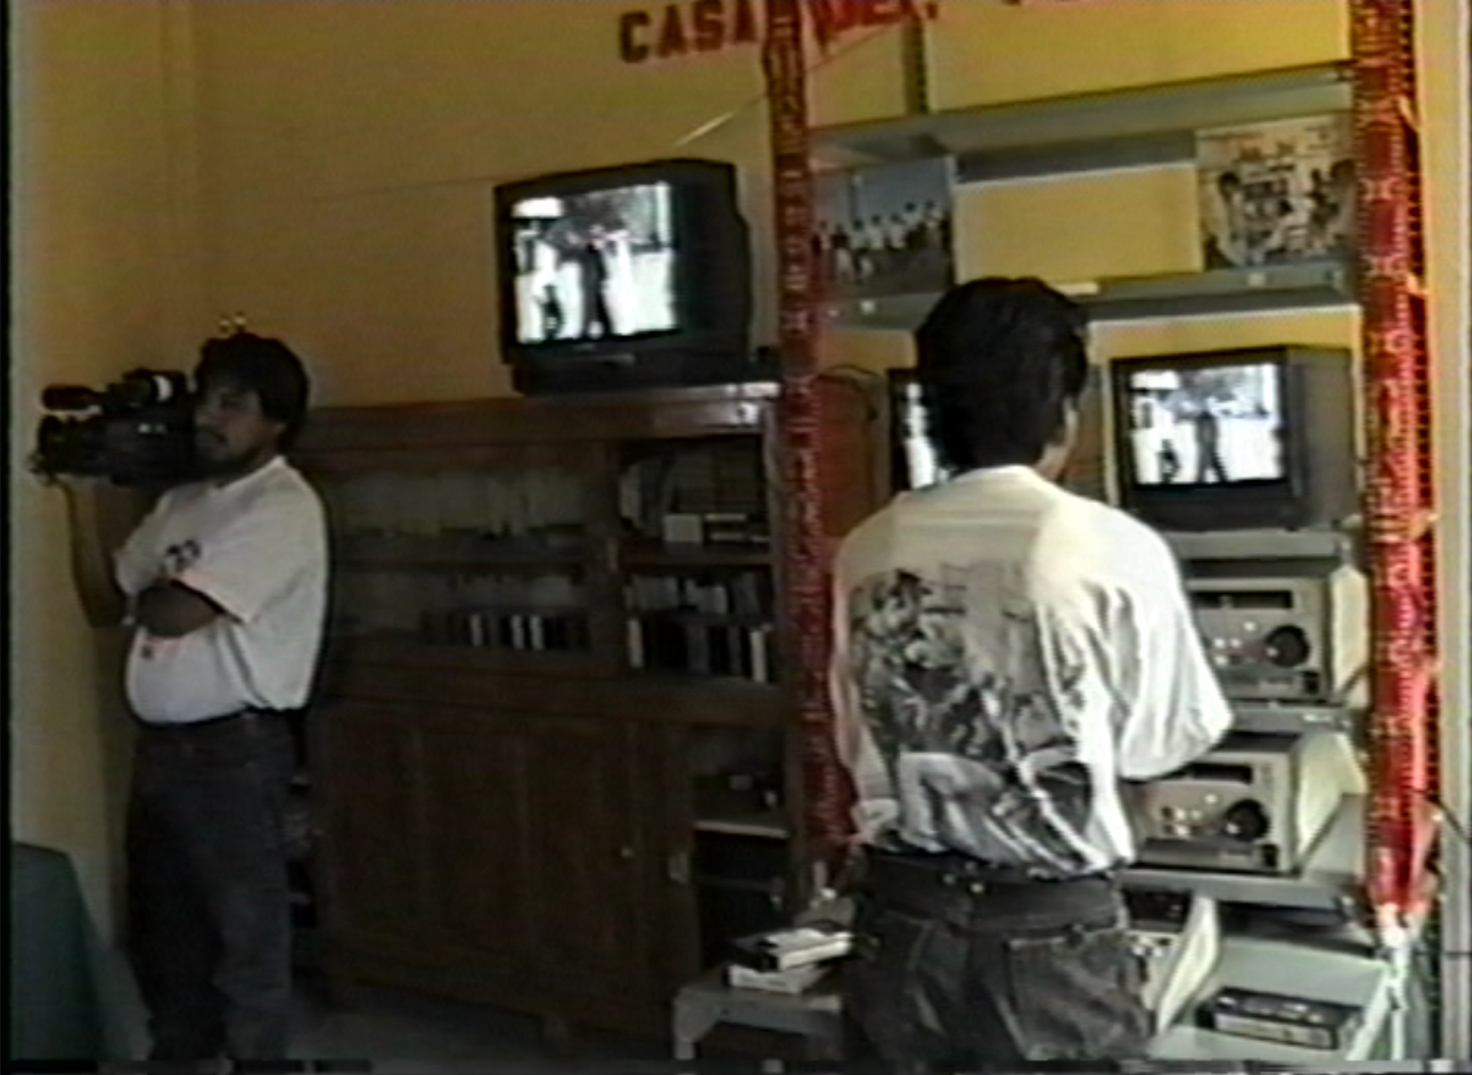 Two people inside, both wearing white t-shirts and jeans, stand around some TV screens. The one on the left holds a camera on their